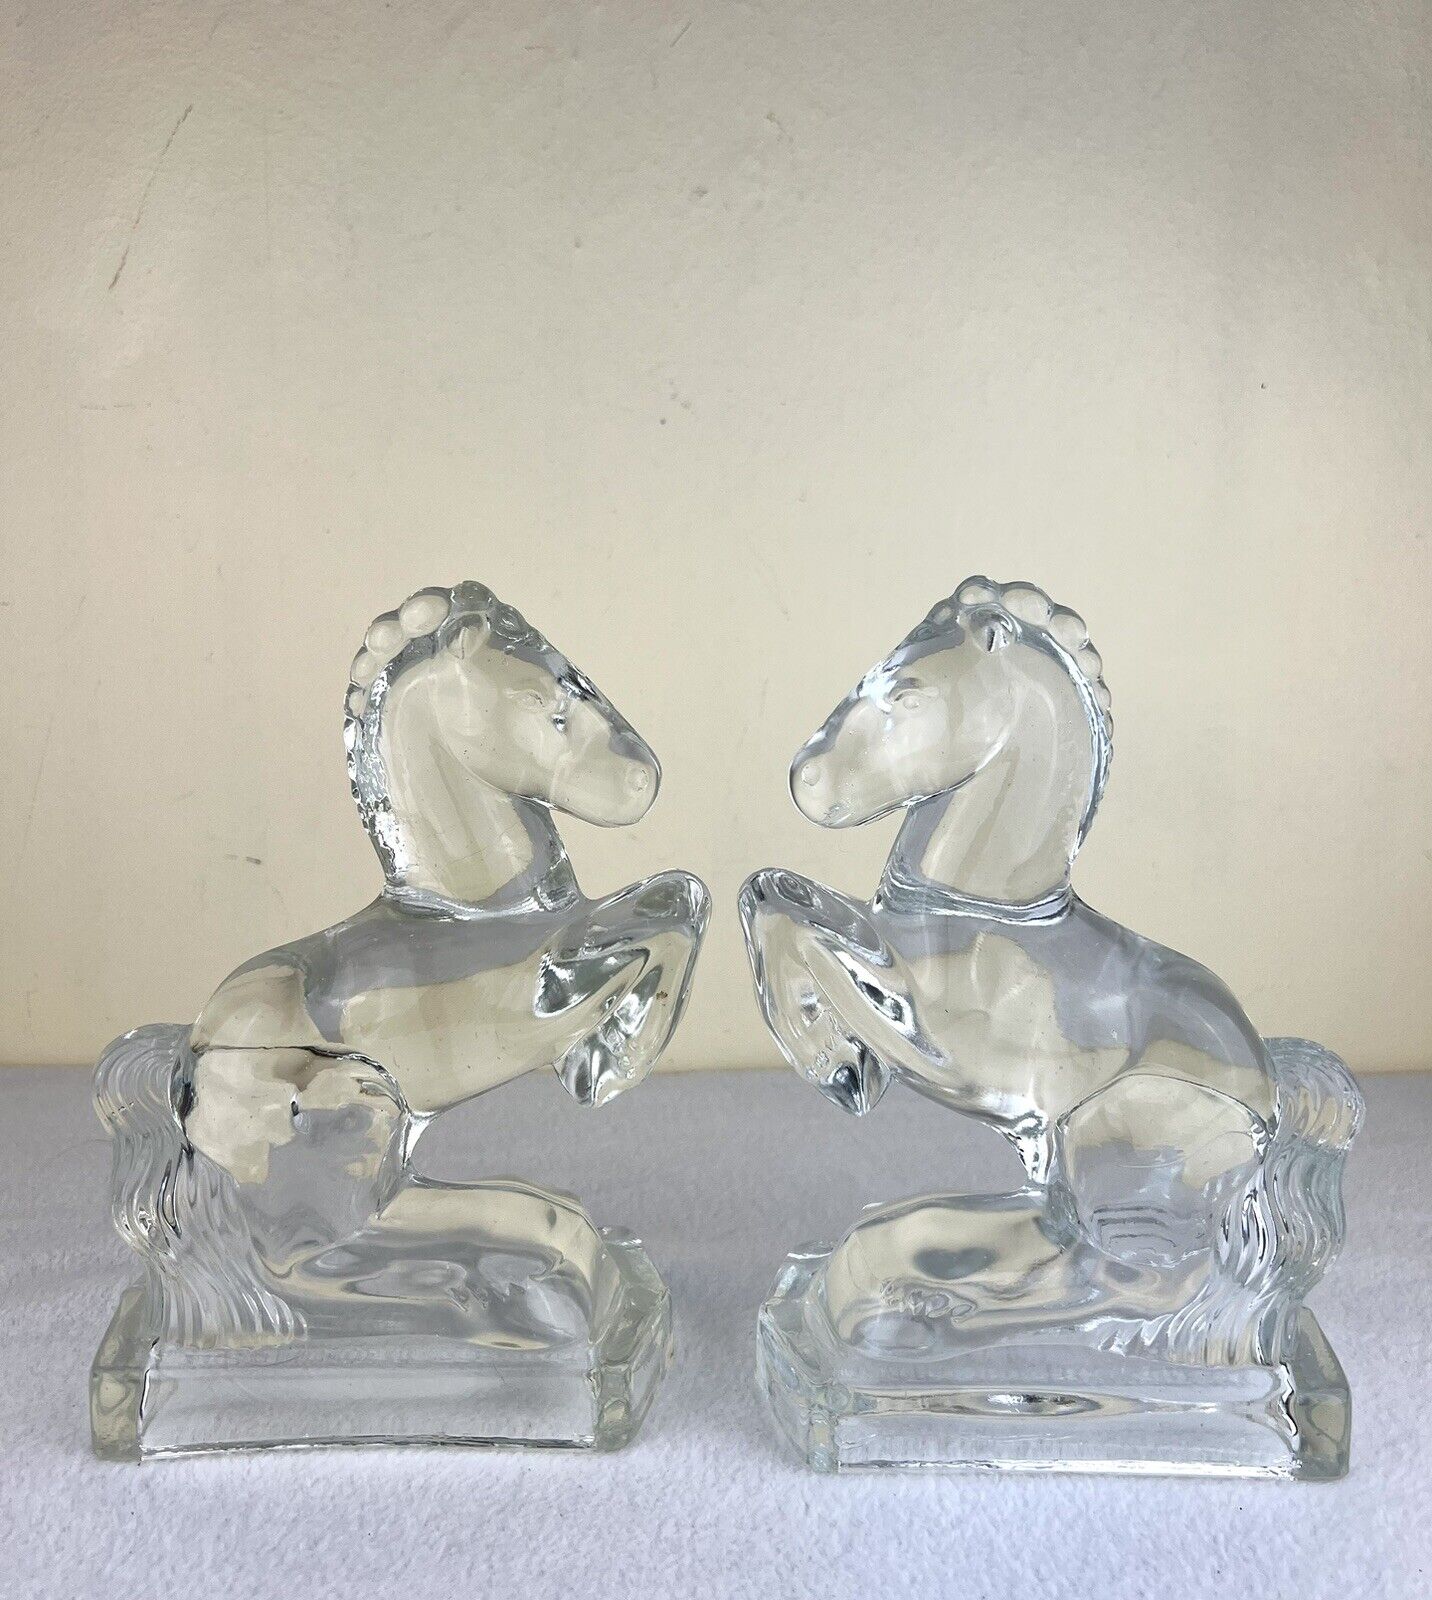 Vintage Pair of Clear Glass Rearing Horse Bookends Heavy Blown Glass 8” Tall